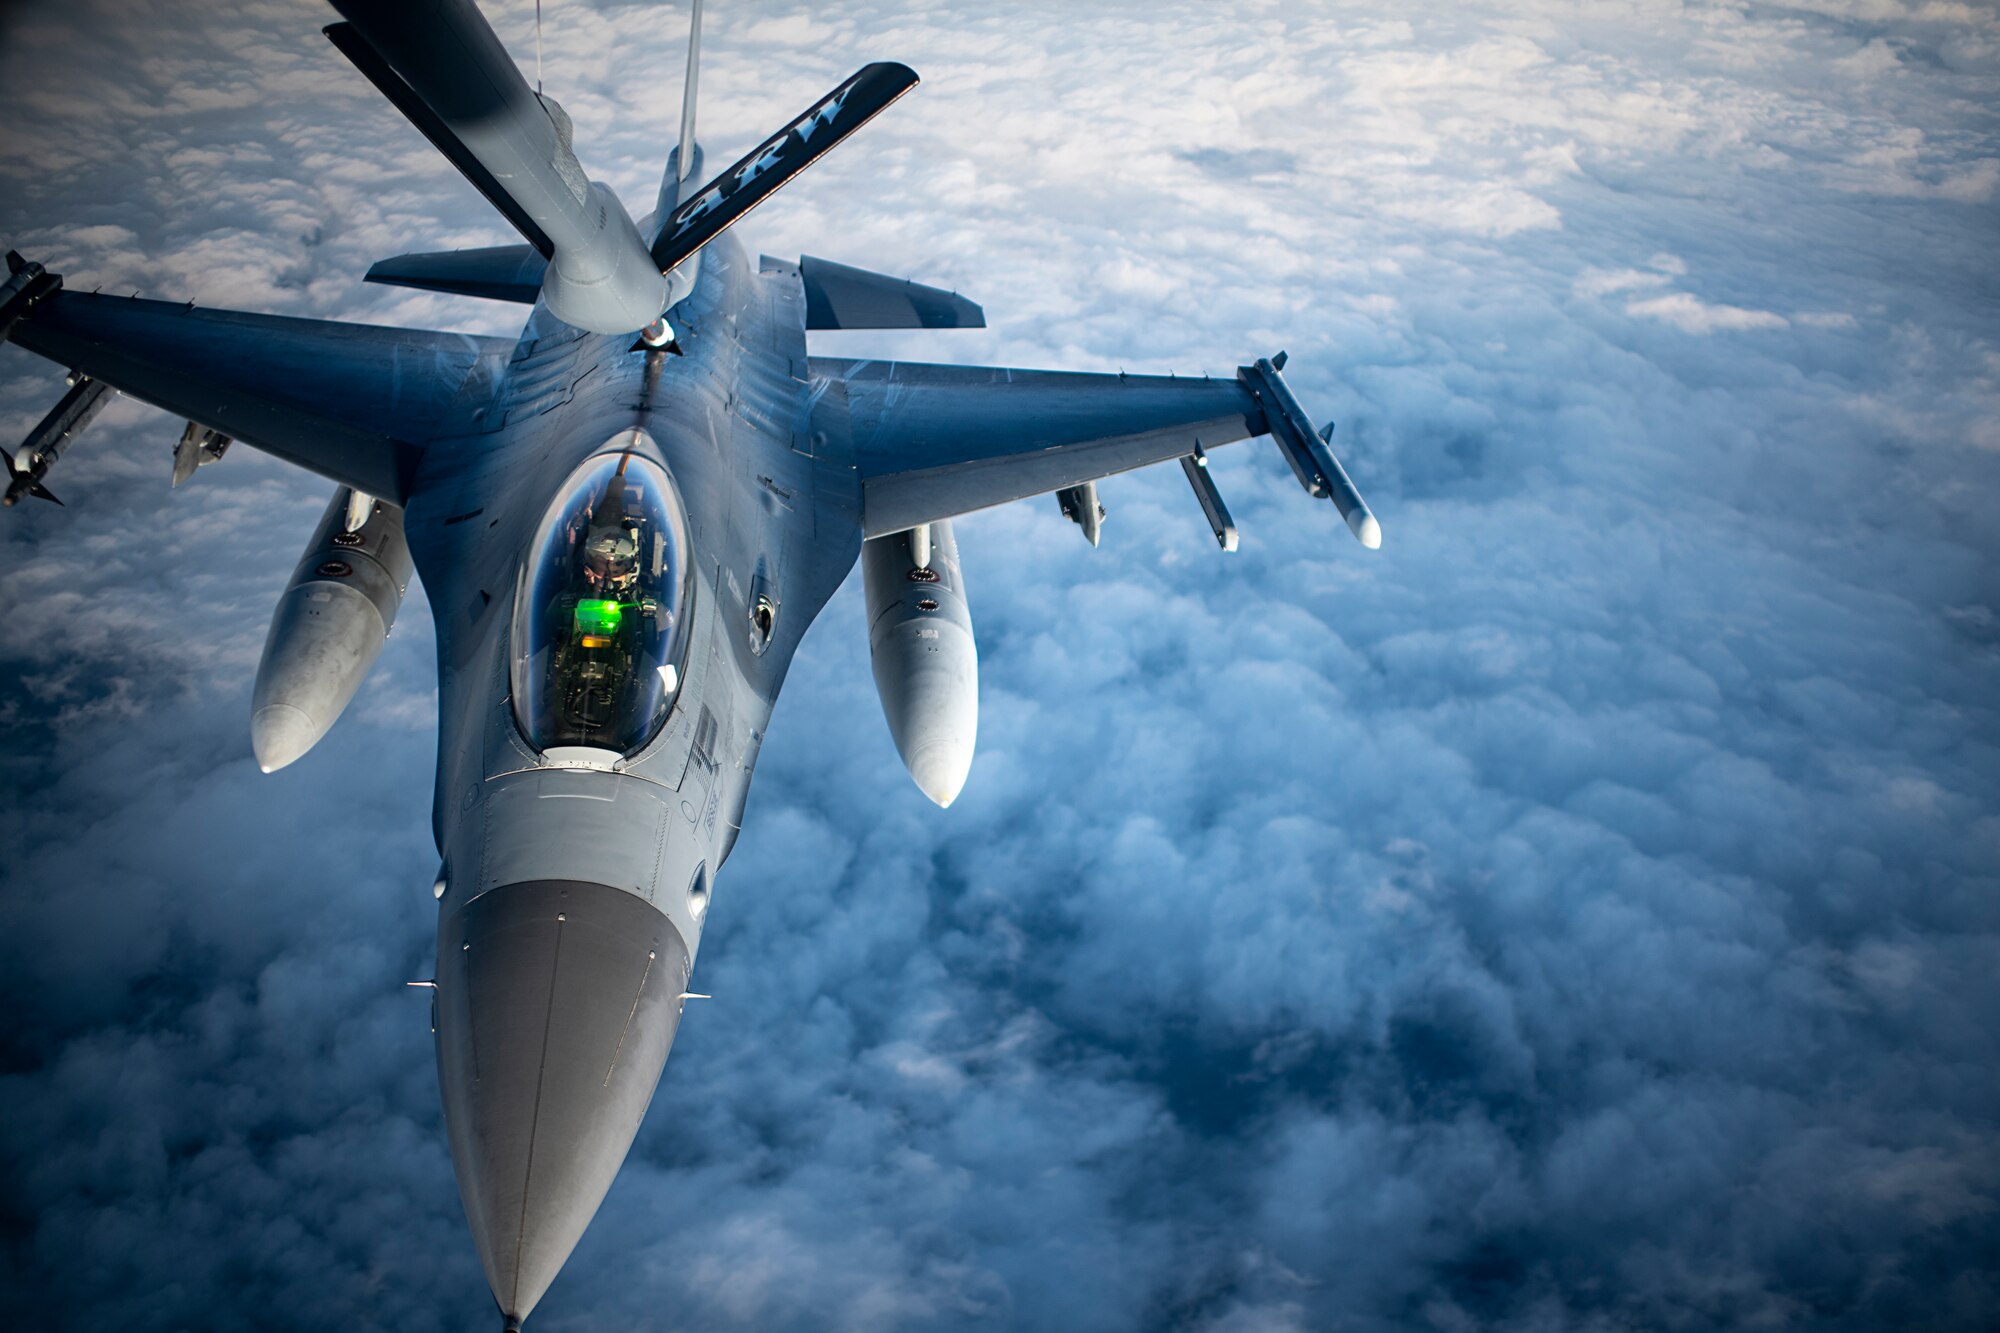 A U.S. Air Force F-16 Fighting Falcon assigned to the 555th Fighter Squadron, Aviano Air Base, Italy, is refueled by a KC-135 Stratotanker assigned to the 100th Air Refueling Wing, RAF Mildenhall, United Kingdom, during a mission over the Black Sea, Jan. 14, 2021. U.S. military operations in the Black Sea enhance regional stability, combined readiness and capability with our NATO allies and partners.